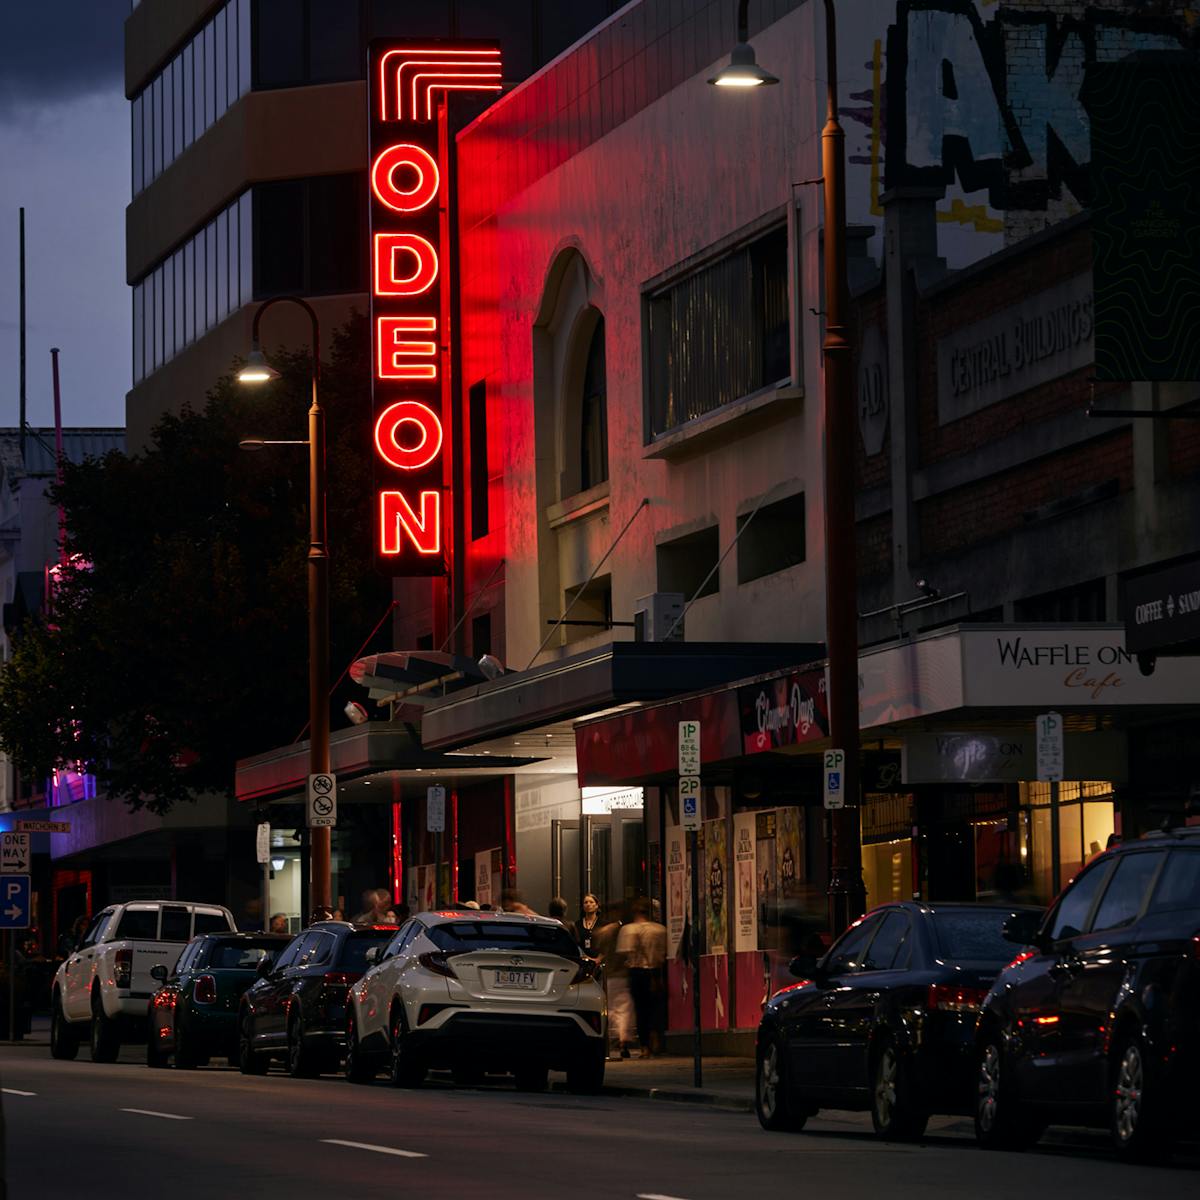 A view of cars in the street with a neon sign in the background that reads Odeon